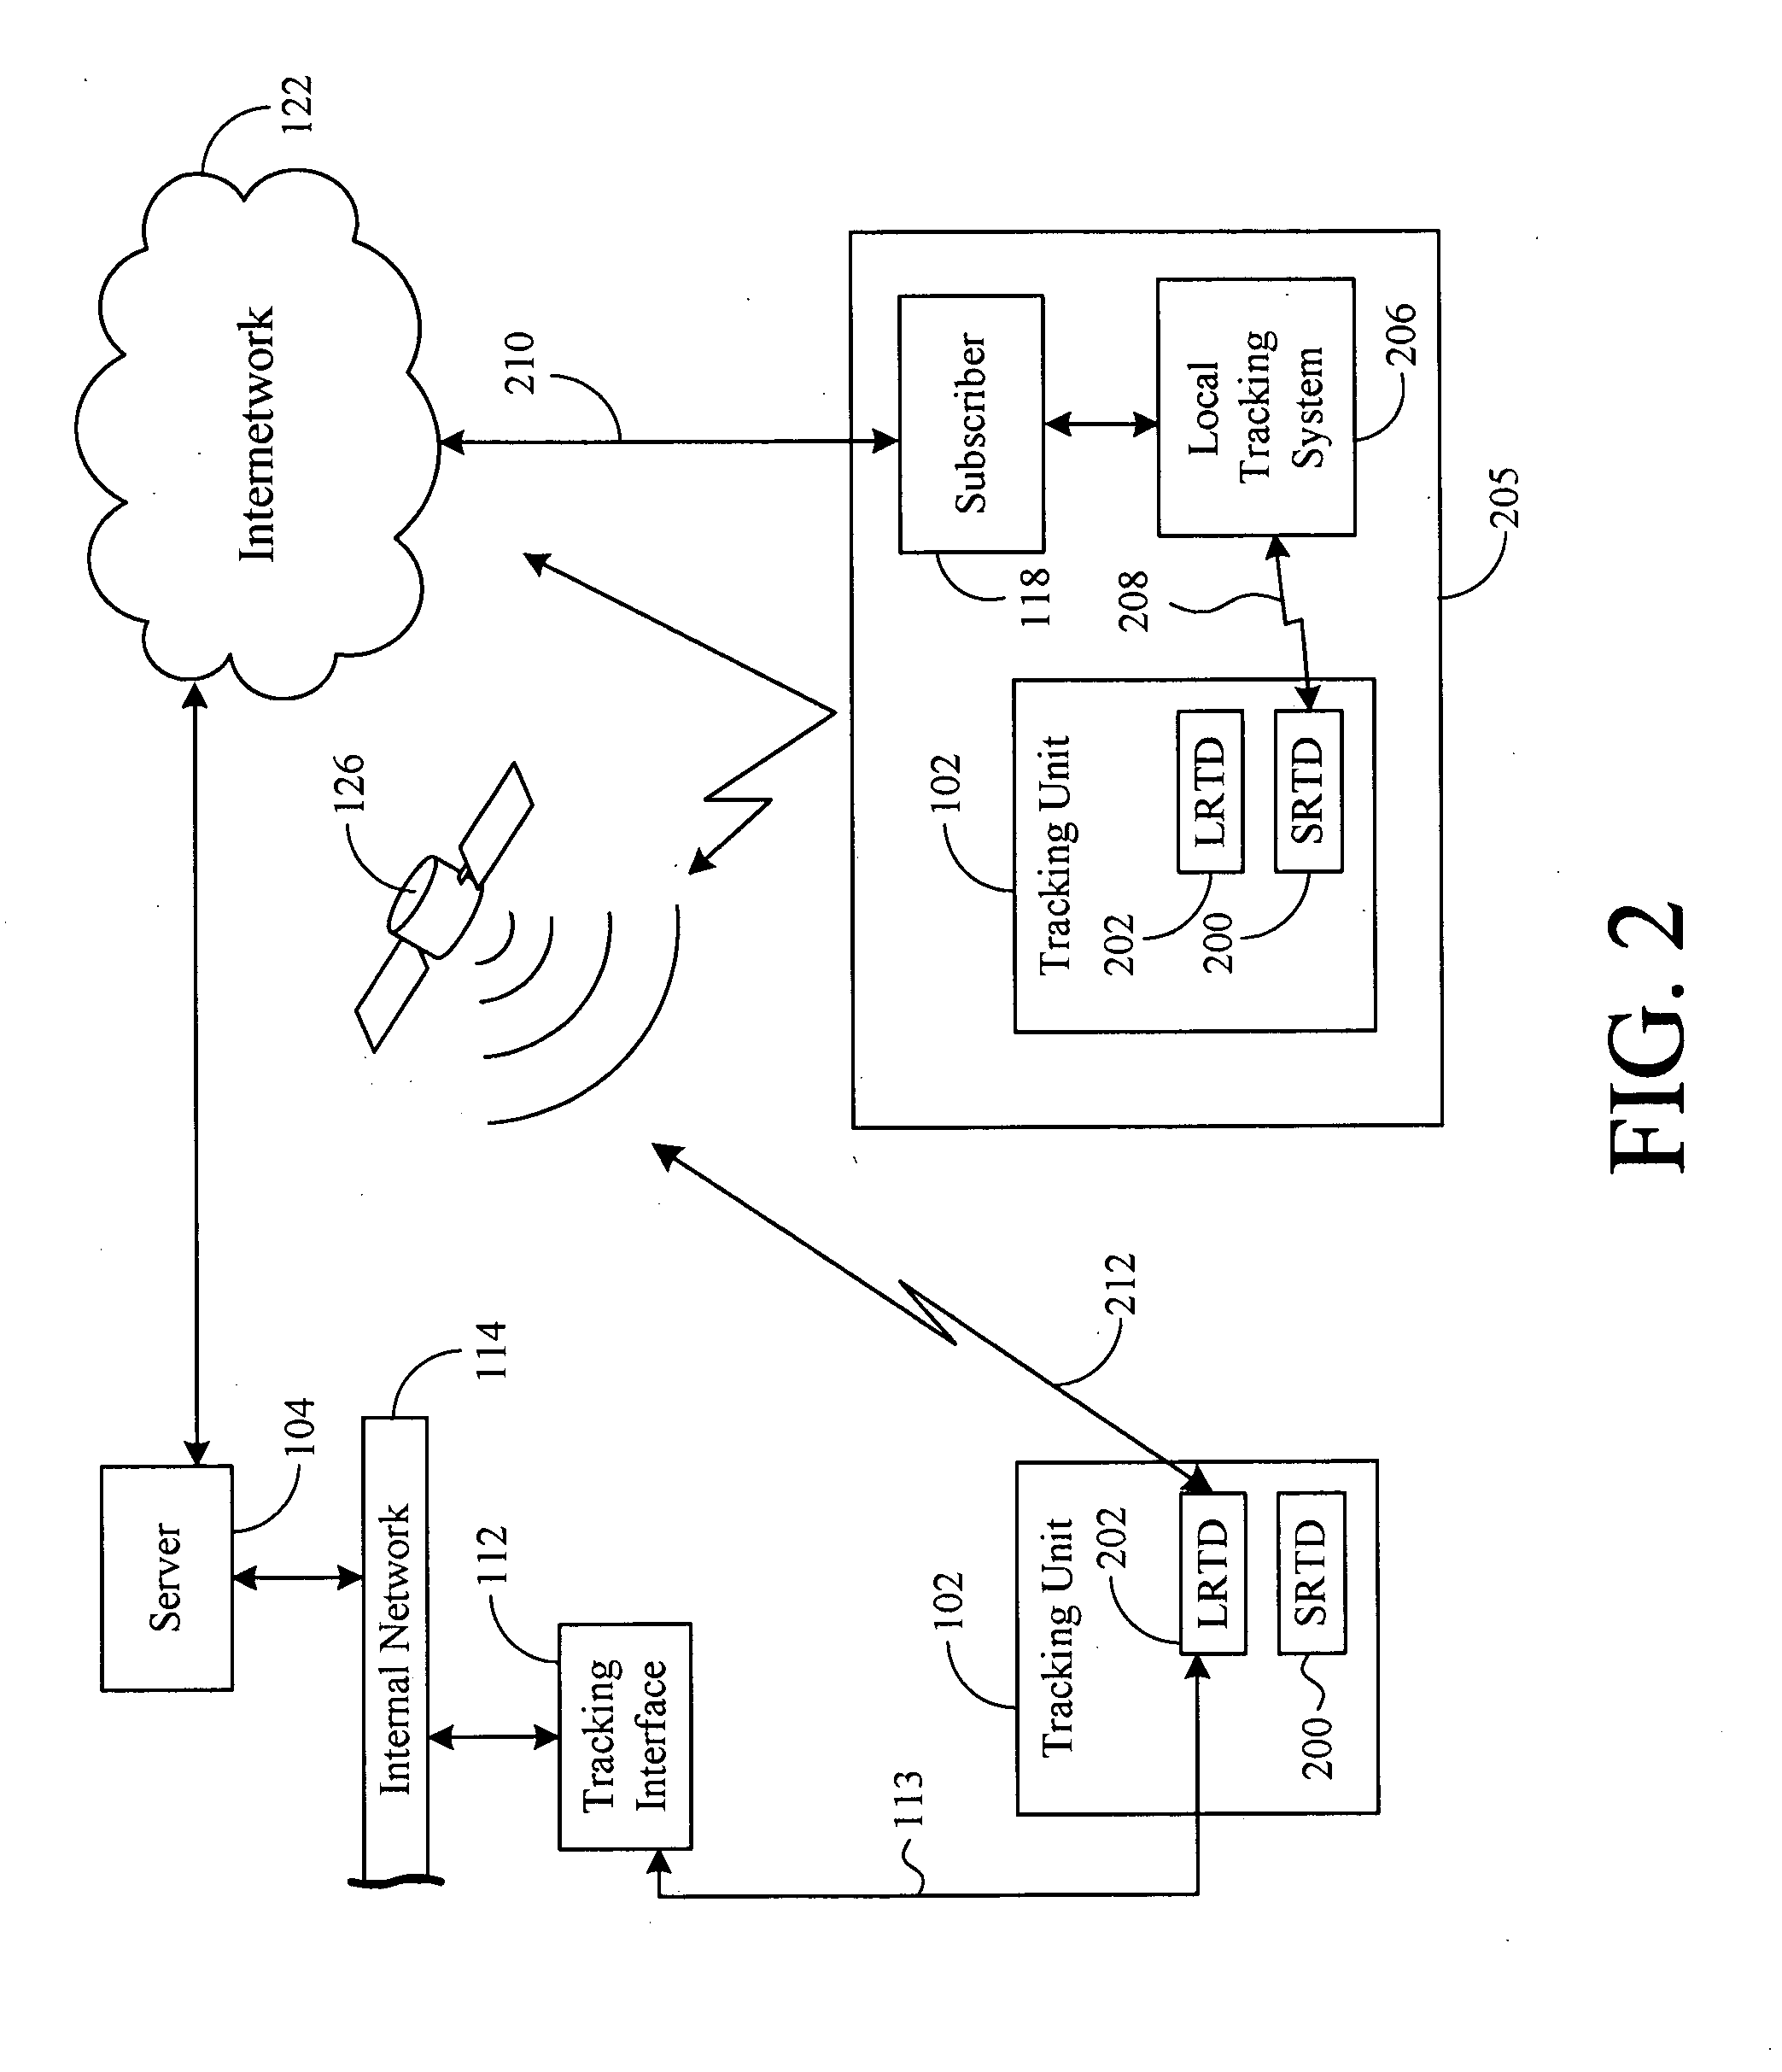 System and method for embedding a tracking device in a footwear insole